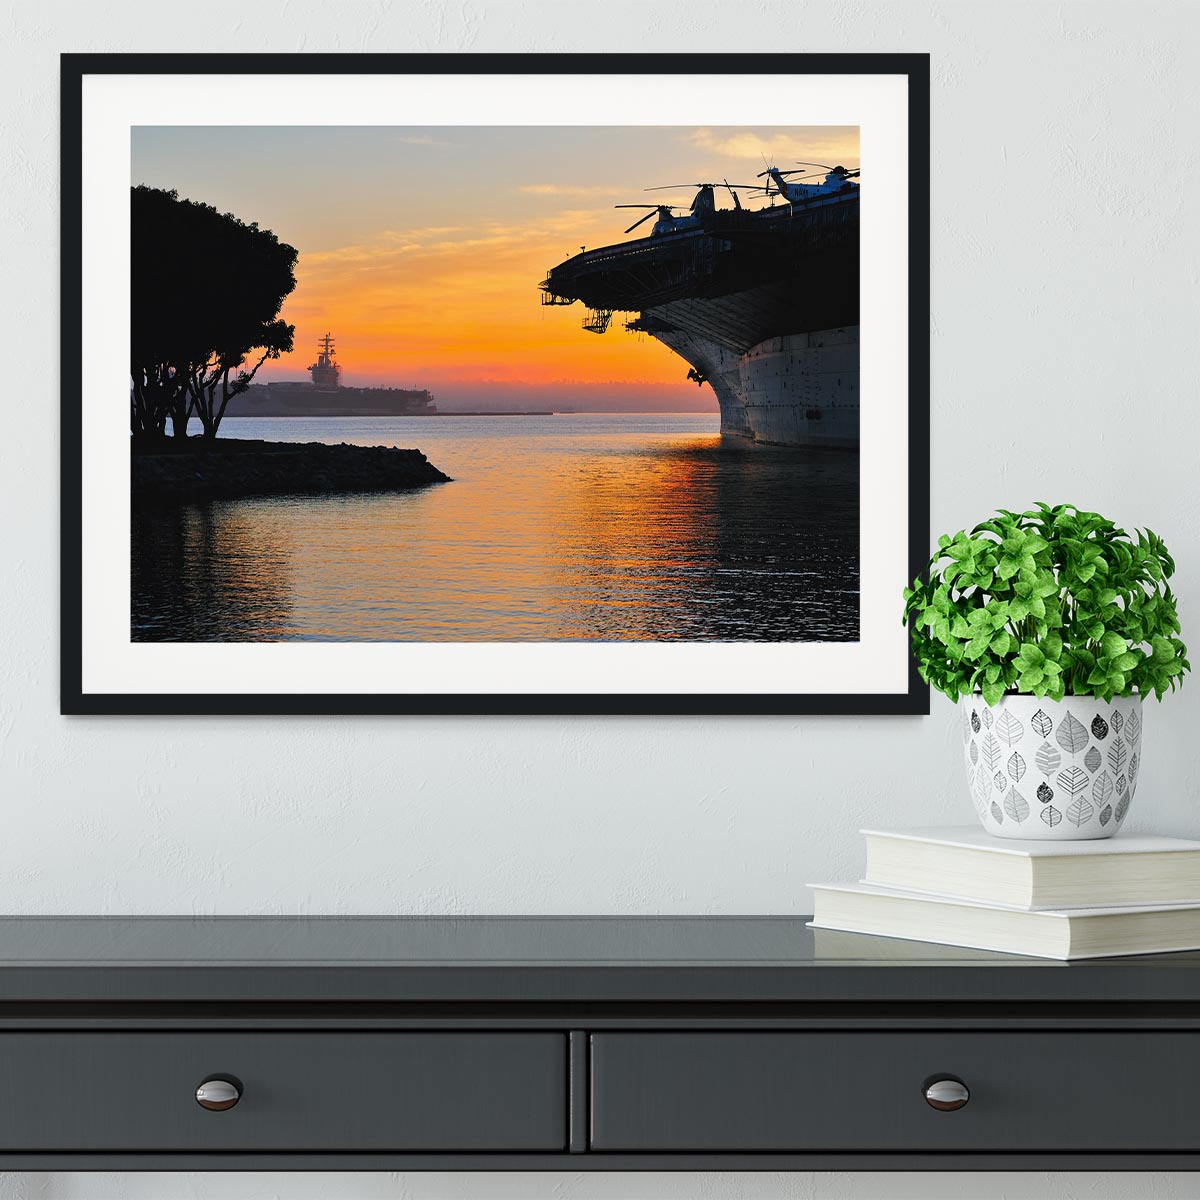 aircraft carrier in harbour in sunset Framed Print - Canvas Art Rocks - 1